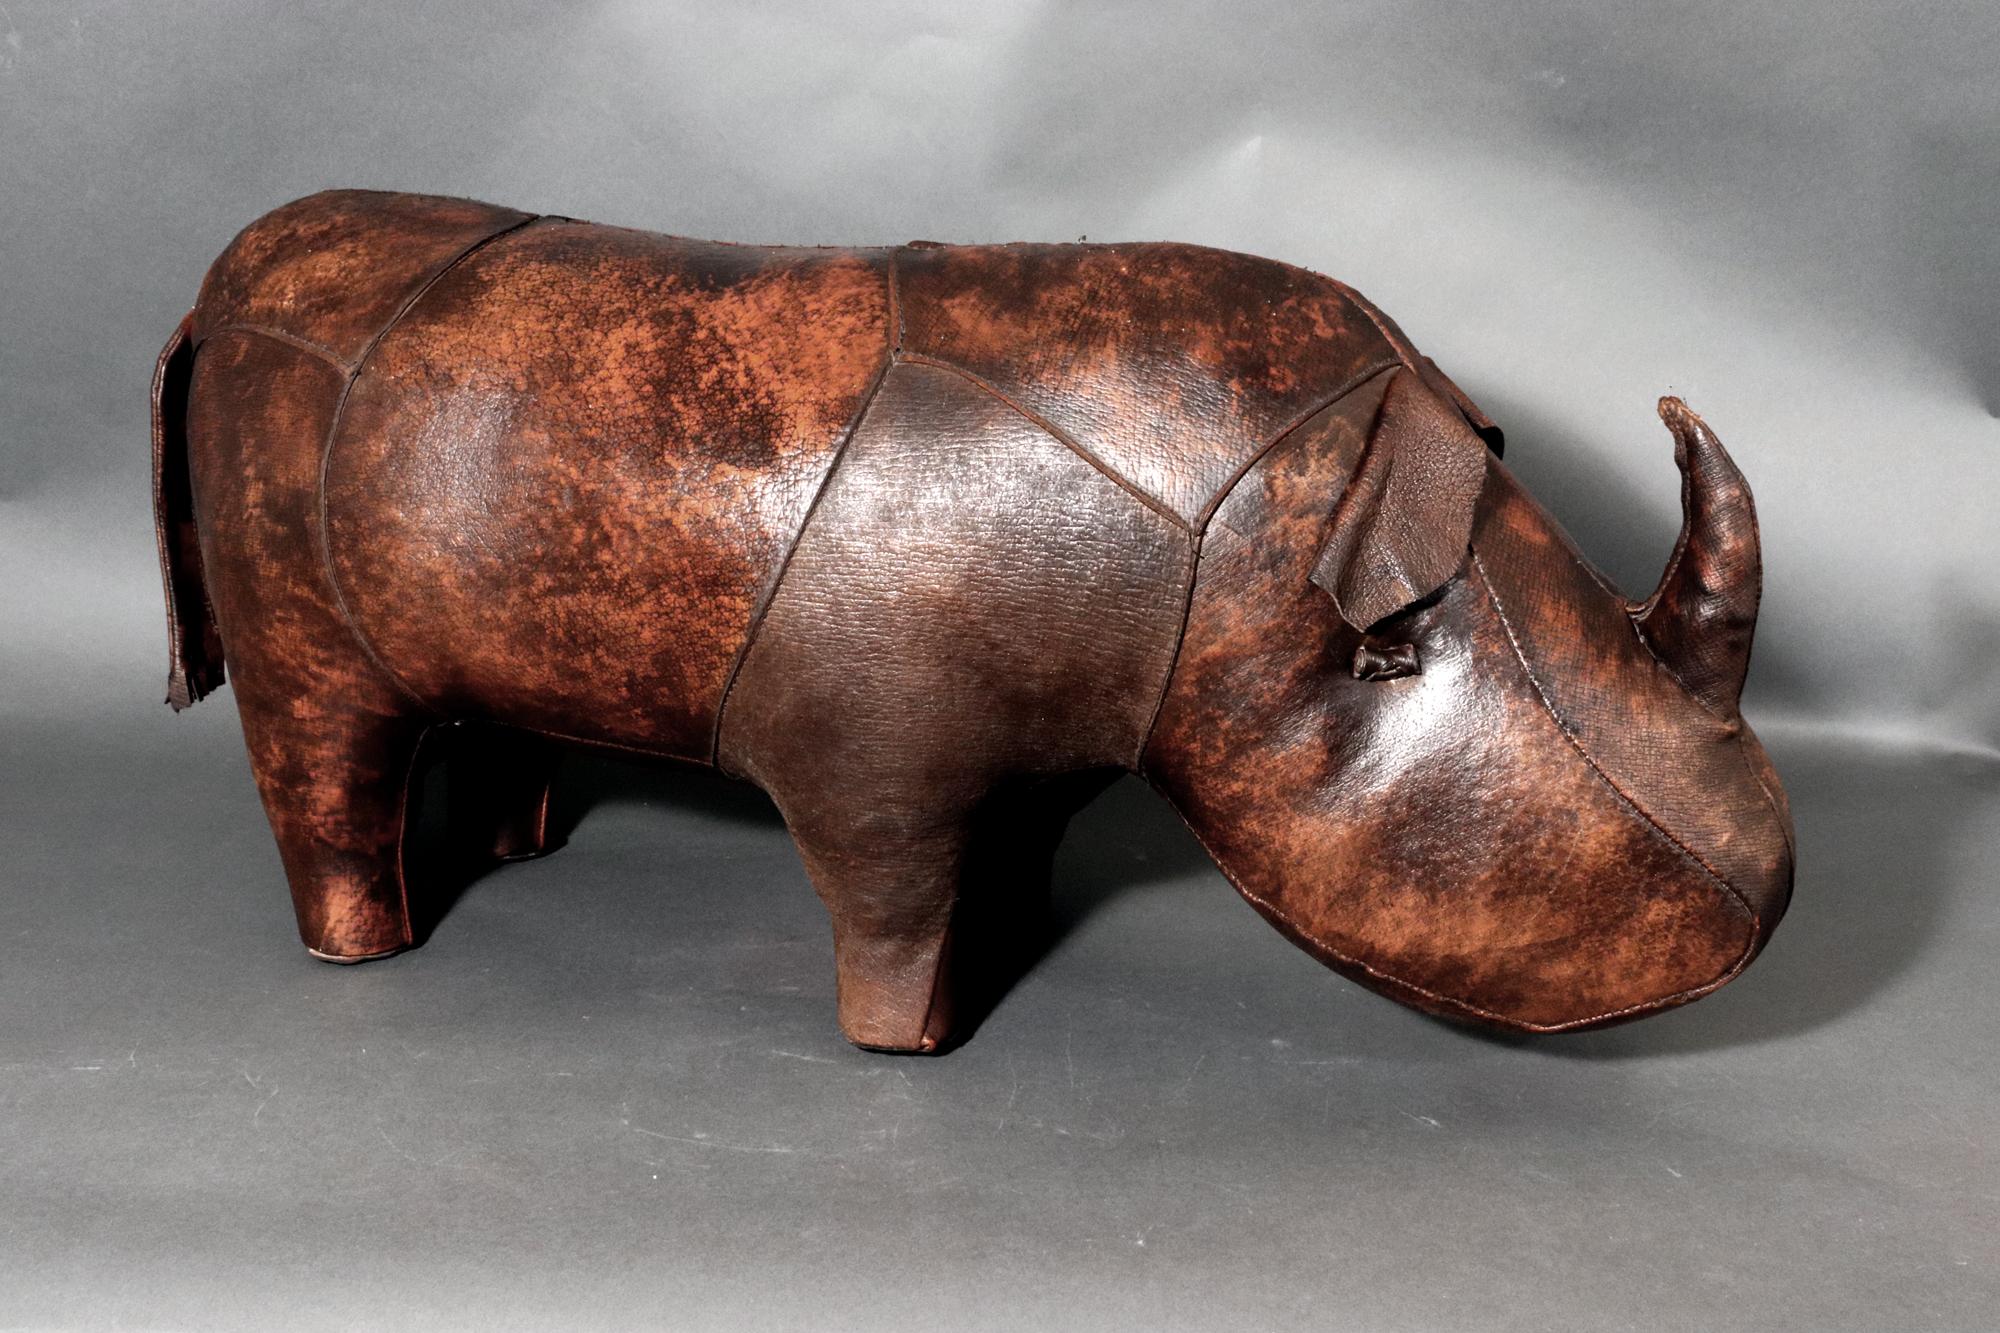 MCM Vintage Leather Rhino Footstool or Ottoman,
The 1960-70s

The Mid-century leather footstool or ottoman is designed in the shape of a Rhino in beautiful dark leather.

Dimensions: 12 1/2 inches high x 29 inches long x 9 inches wide